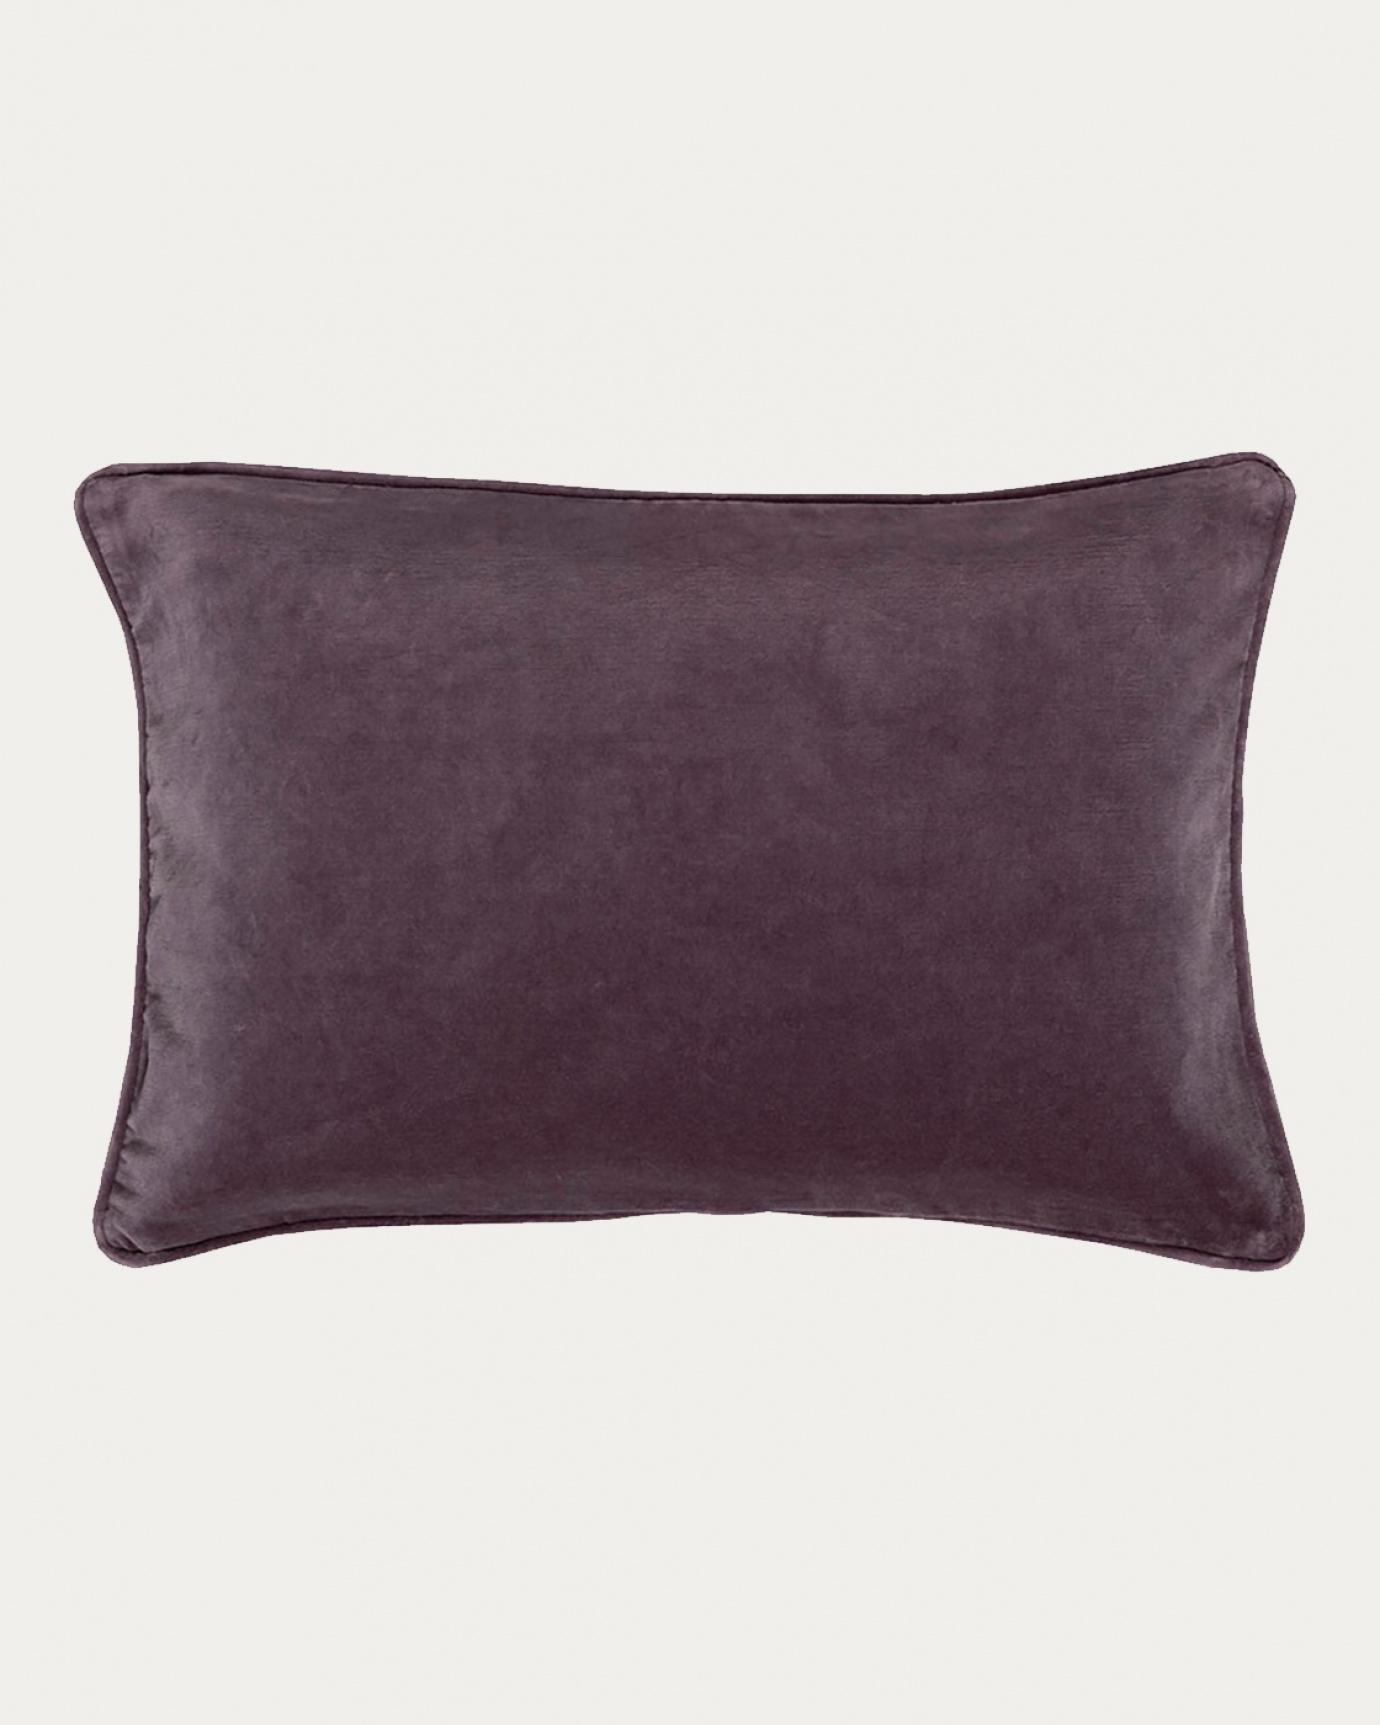 Product image dawn purple PAOLO cushion cover in soft cotton velvet from LINUM DESIGN. Size 40x60 cm.